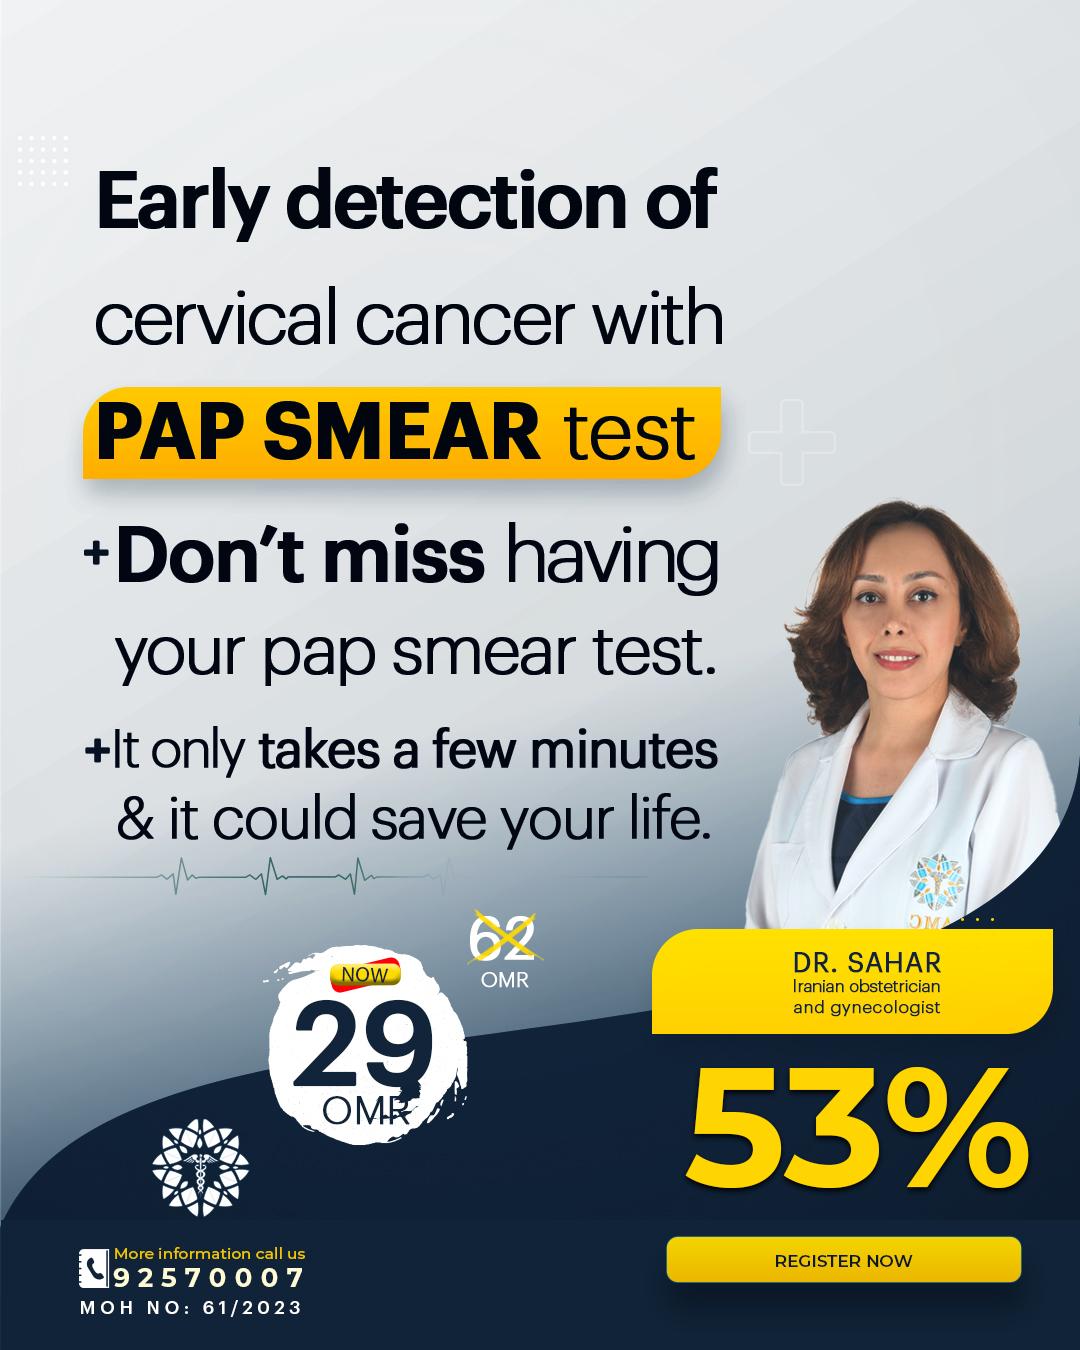 Early detection of cervical cancer